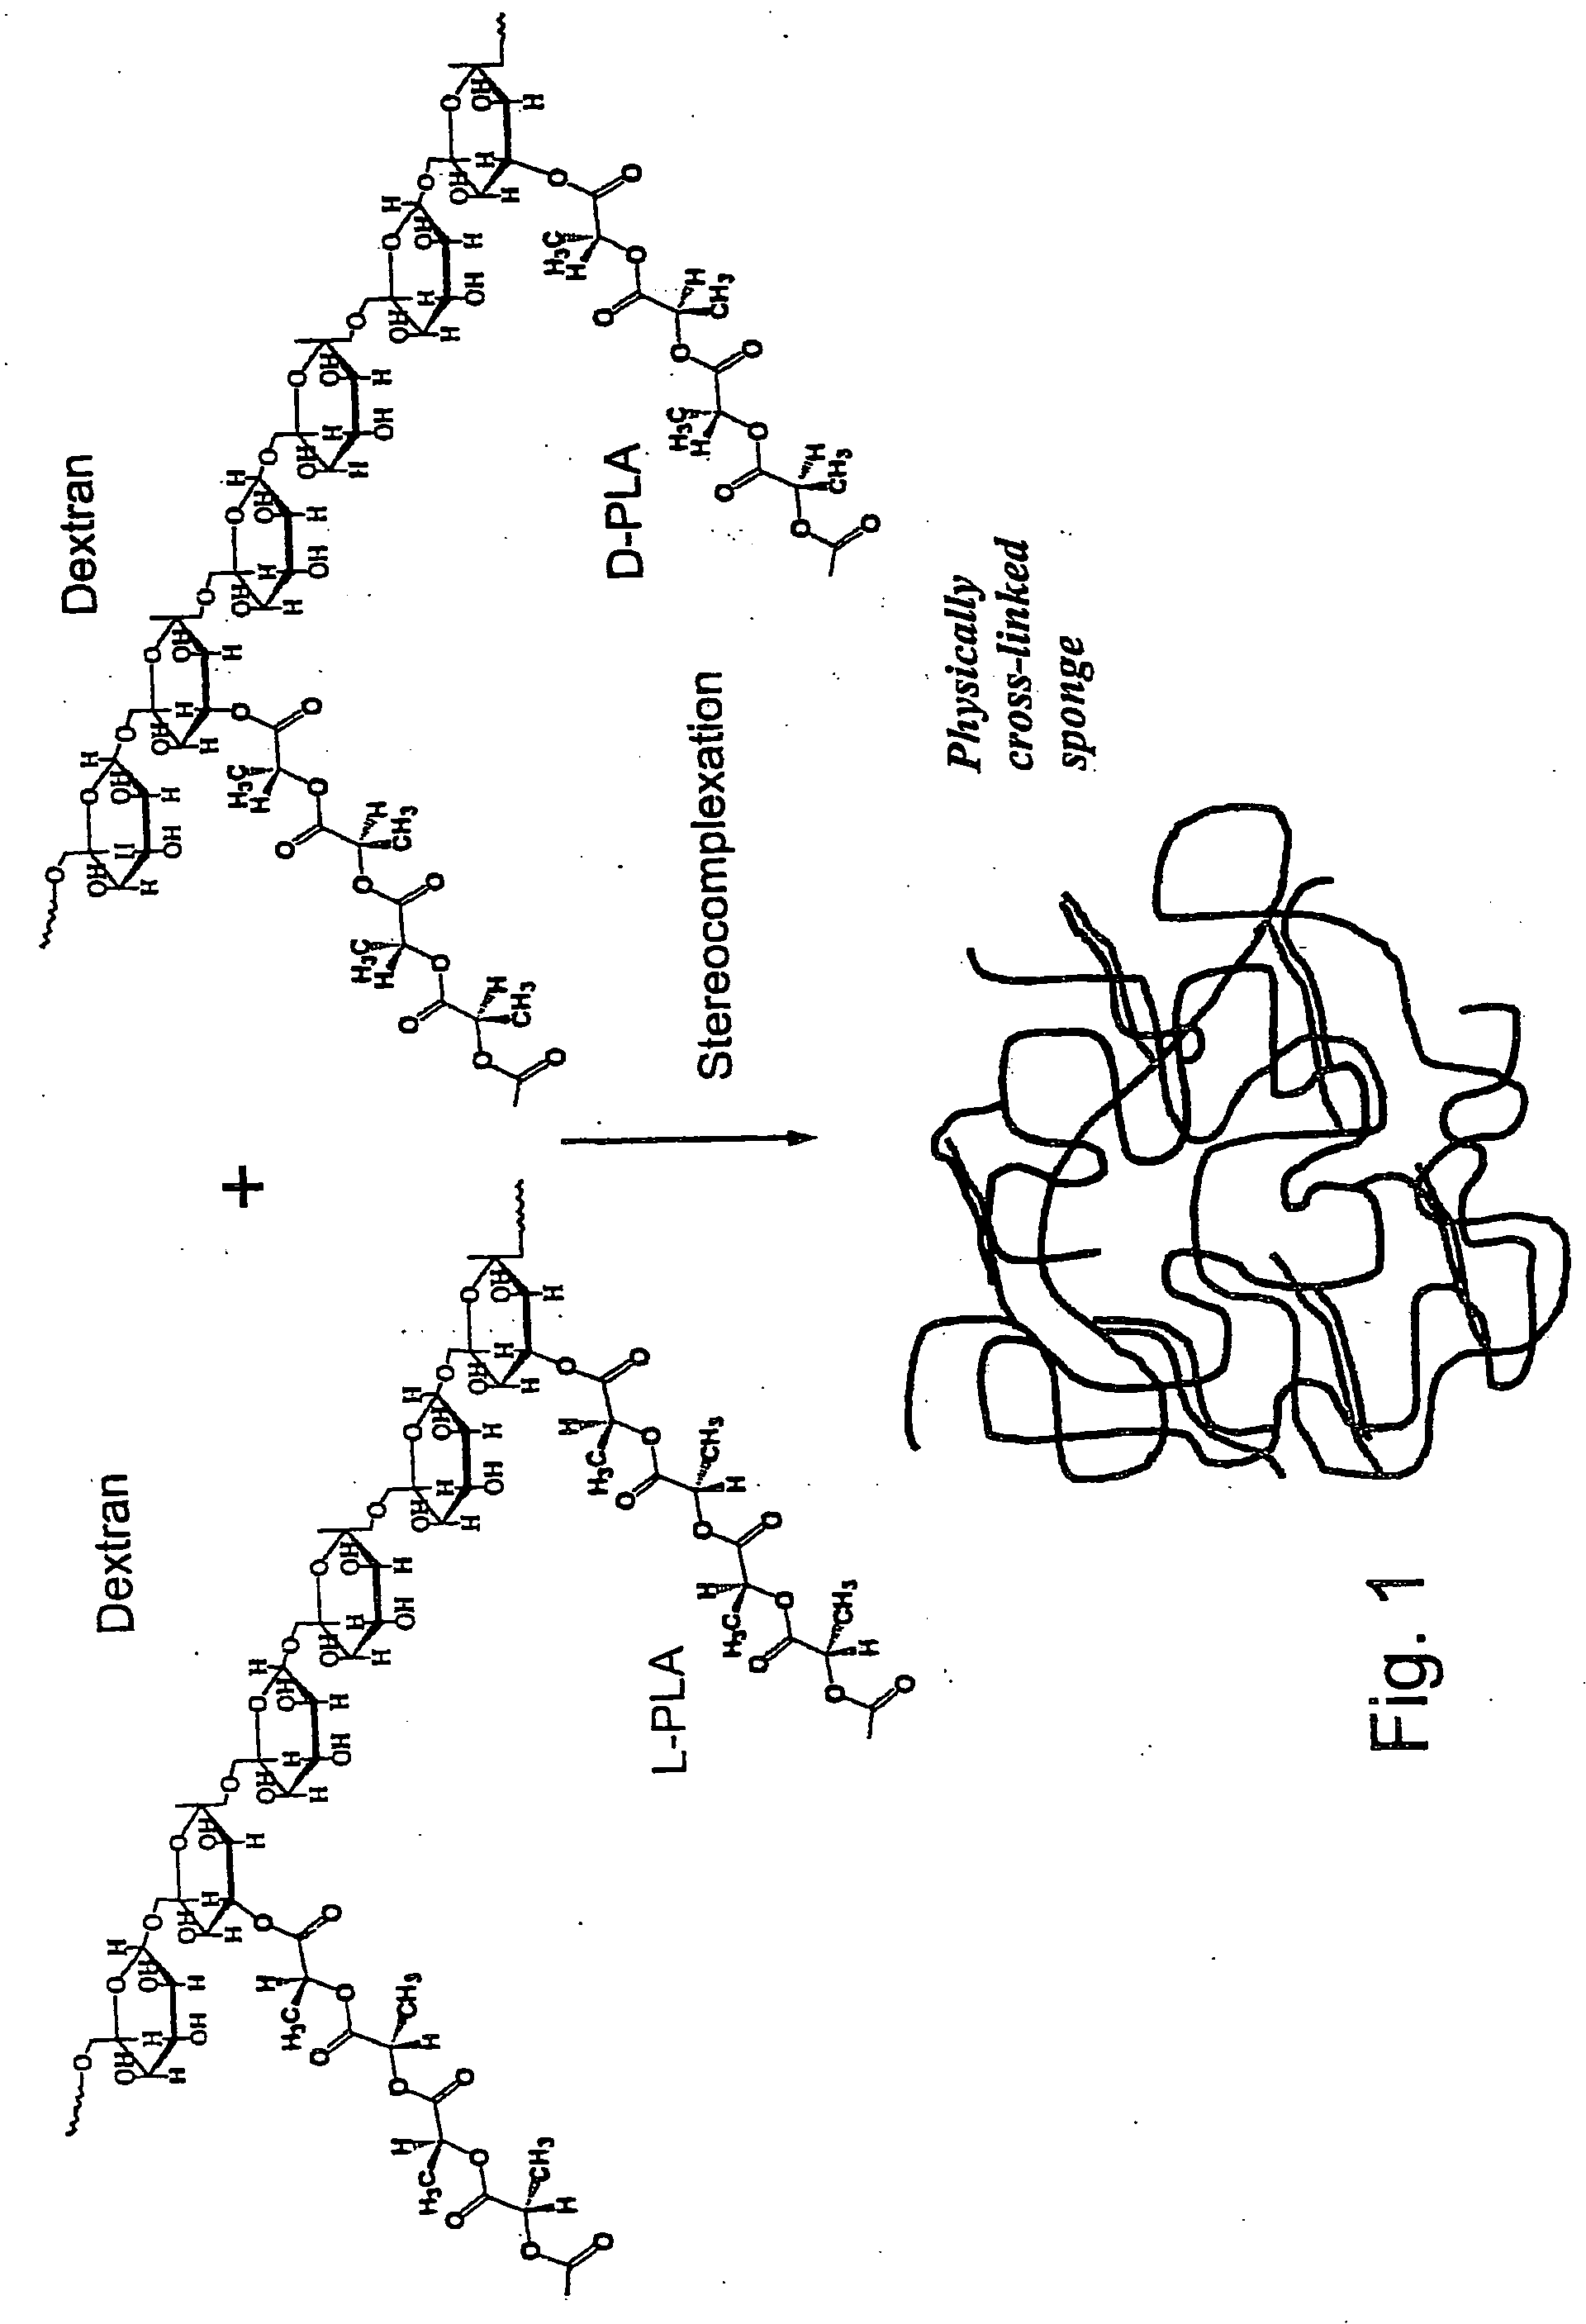 Composite scaffolds and methods using same for generating complex tissue grafts